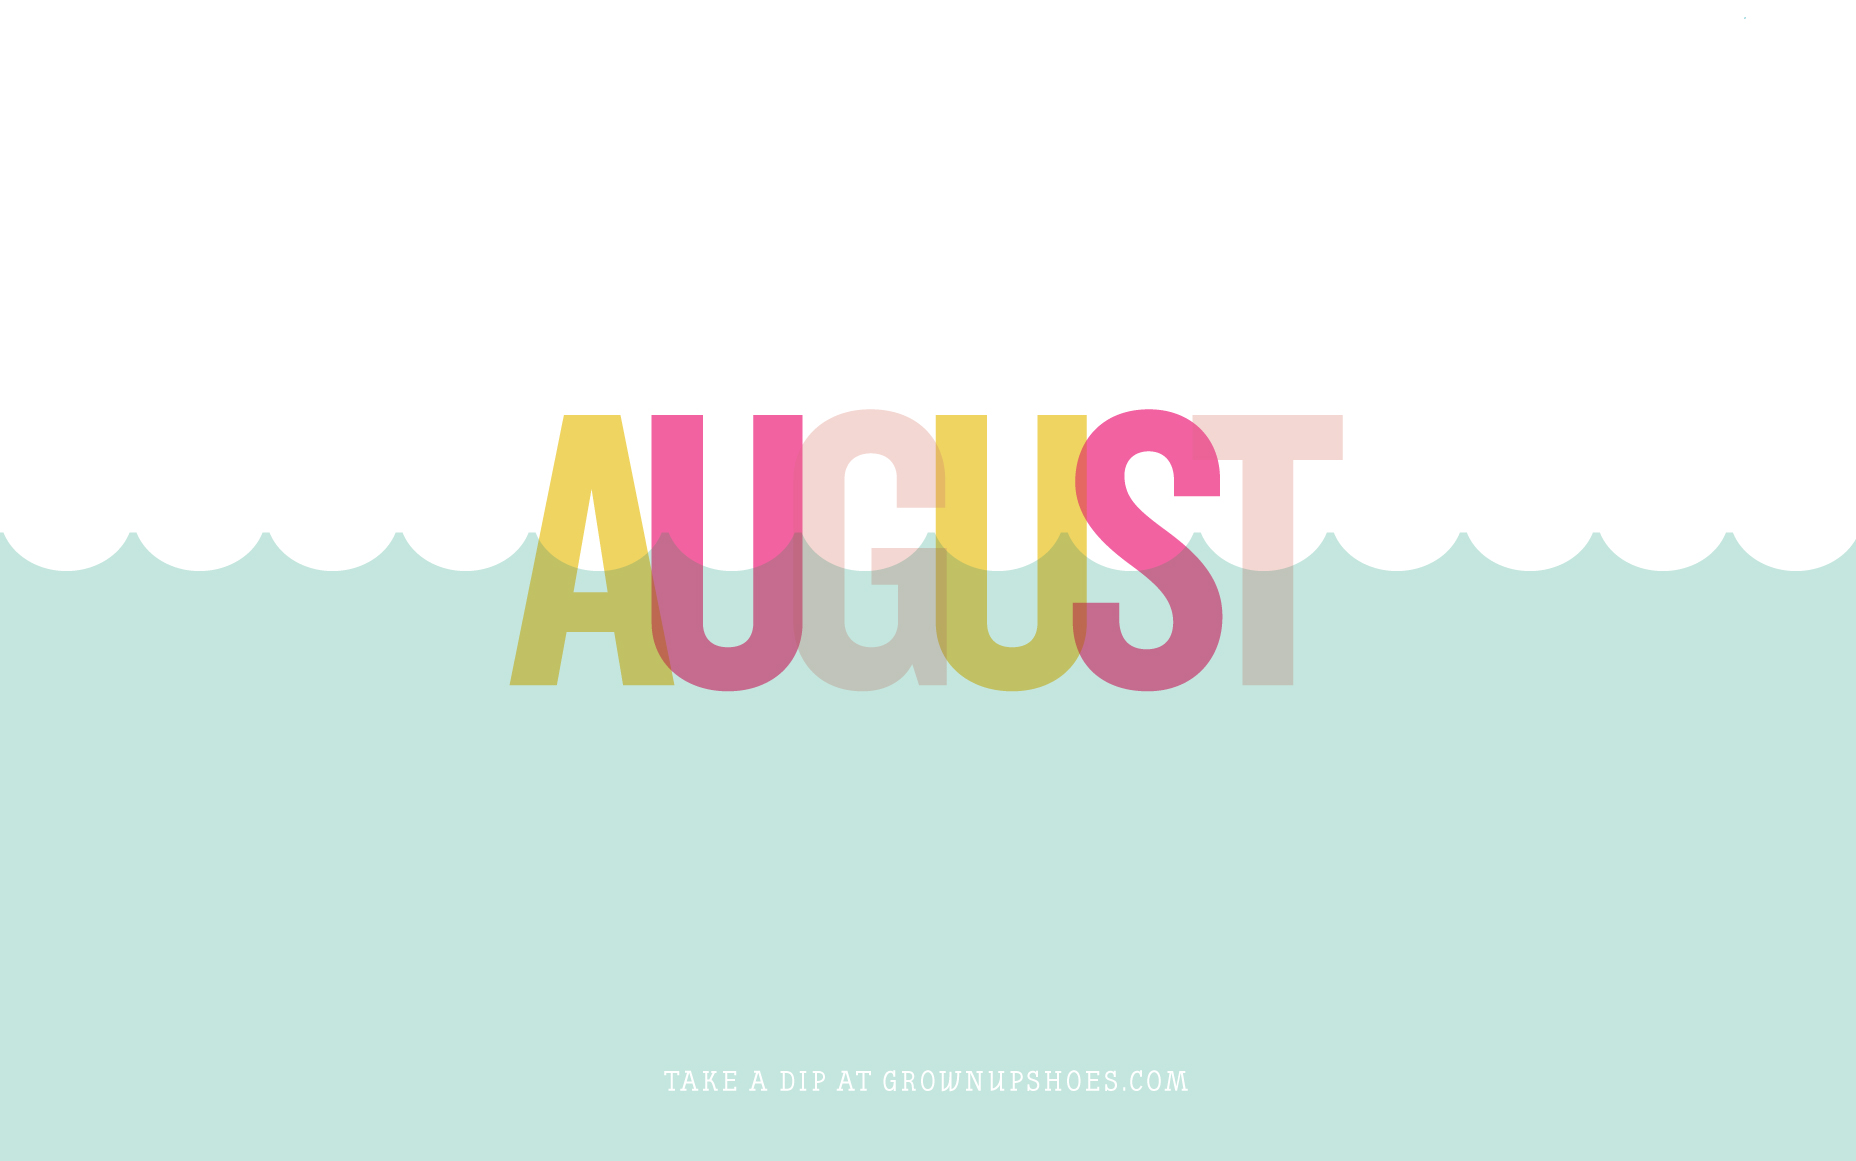 FREE August wallpapers  14 to choose from for desktop and phone